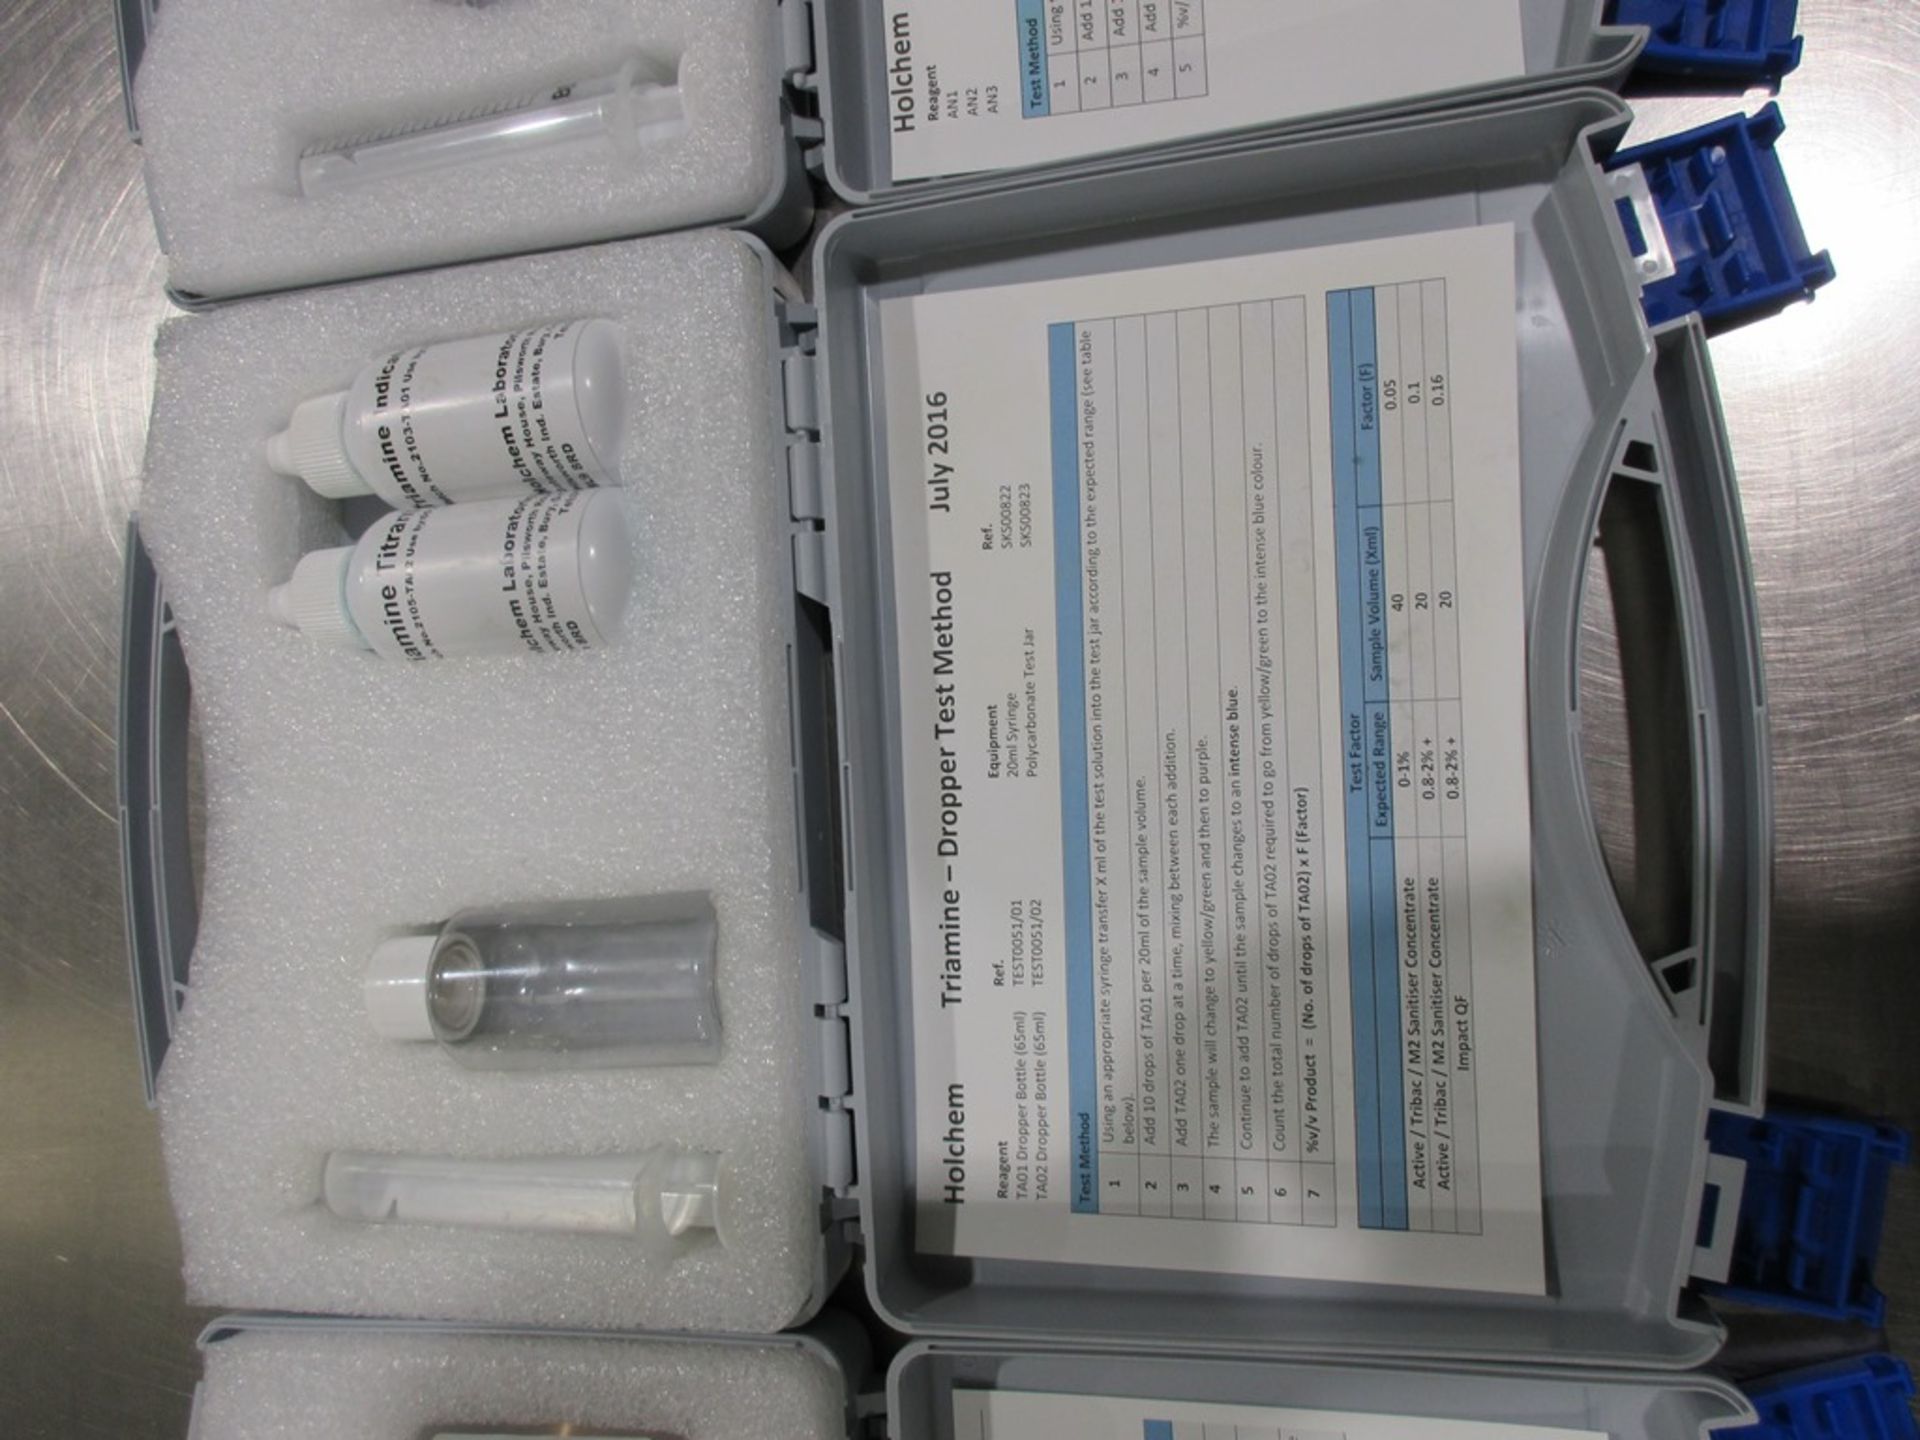 Holchem QAC, Triamine, Anionic and Alkaline dropper test method sets and Conmark C12 digital - Image 3 of 6